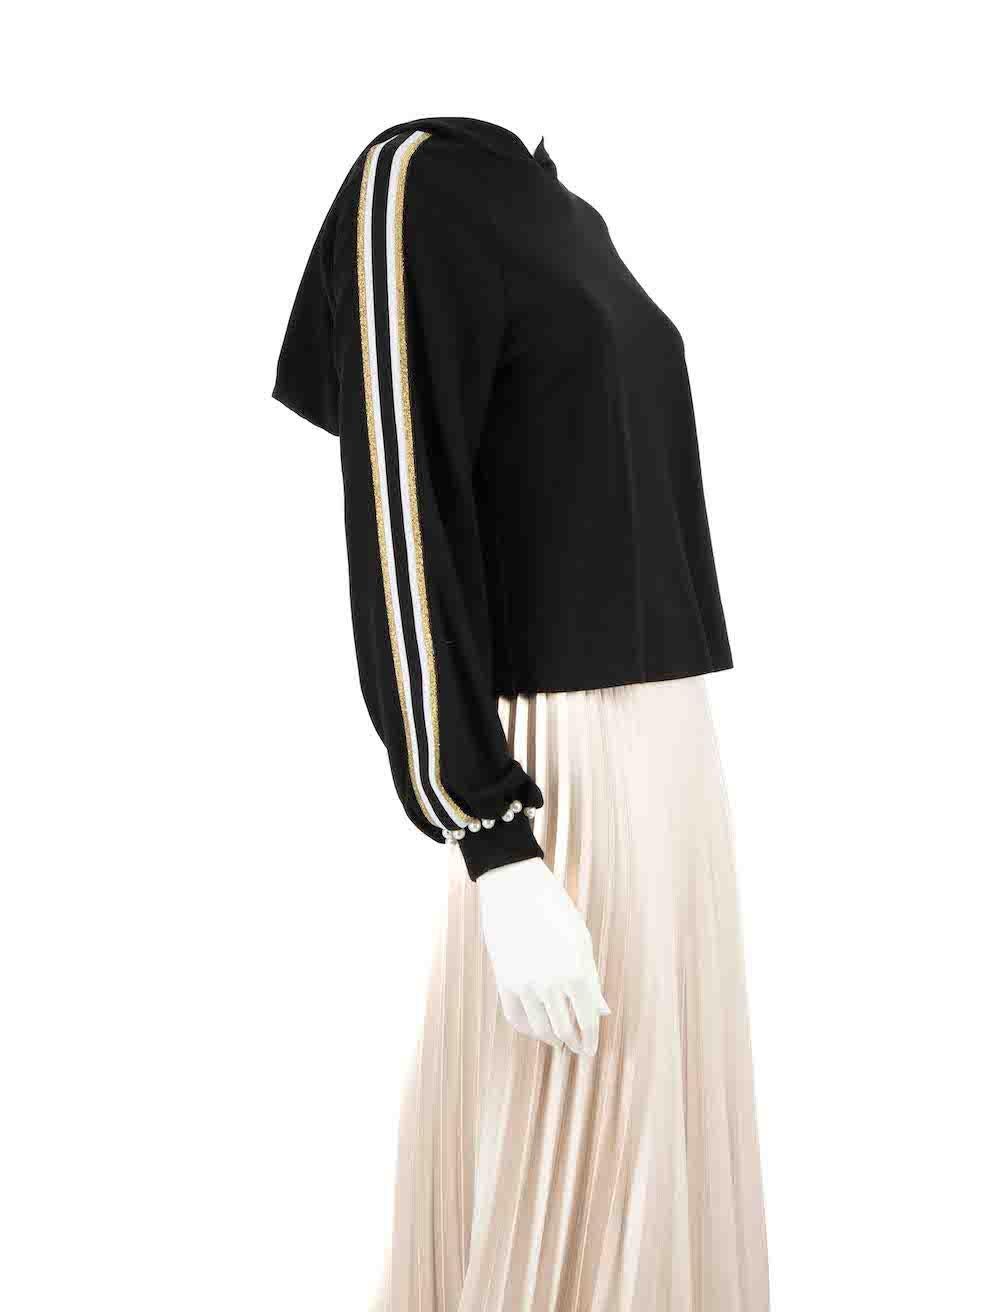 CONDITION is Very good. Hardly any visible wear to hoodie is evident on this used LPA designer resale item.
 
 
 
 Details
 
 
 Black
 
 Synthetic
 
 Hoodie
 
 Pearl cuff detail
 
 Sleeve stripe tape detail
 
 Cropped
 
 
 
 
 
 Made in China
 
 
 
